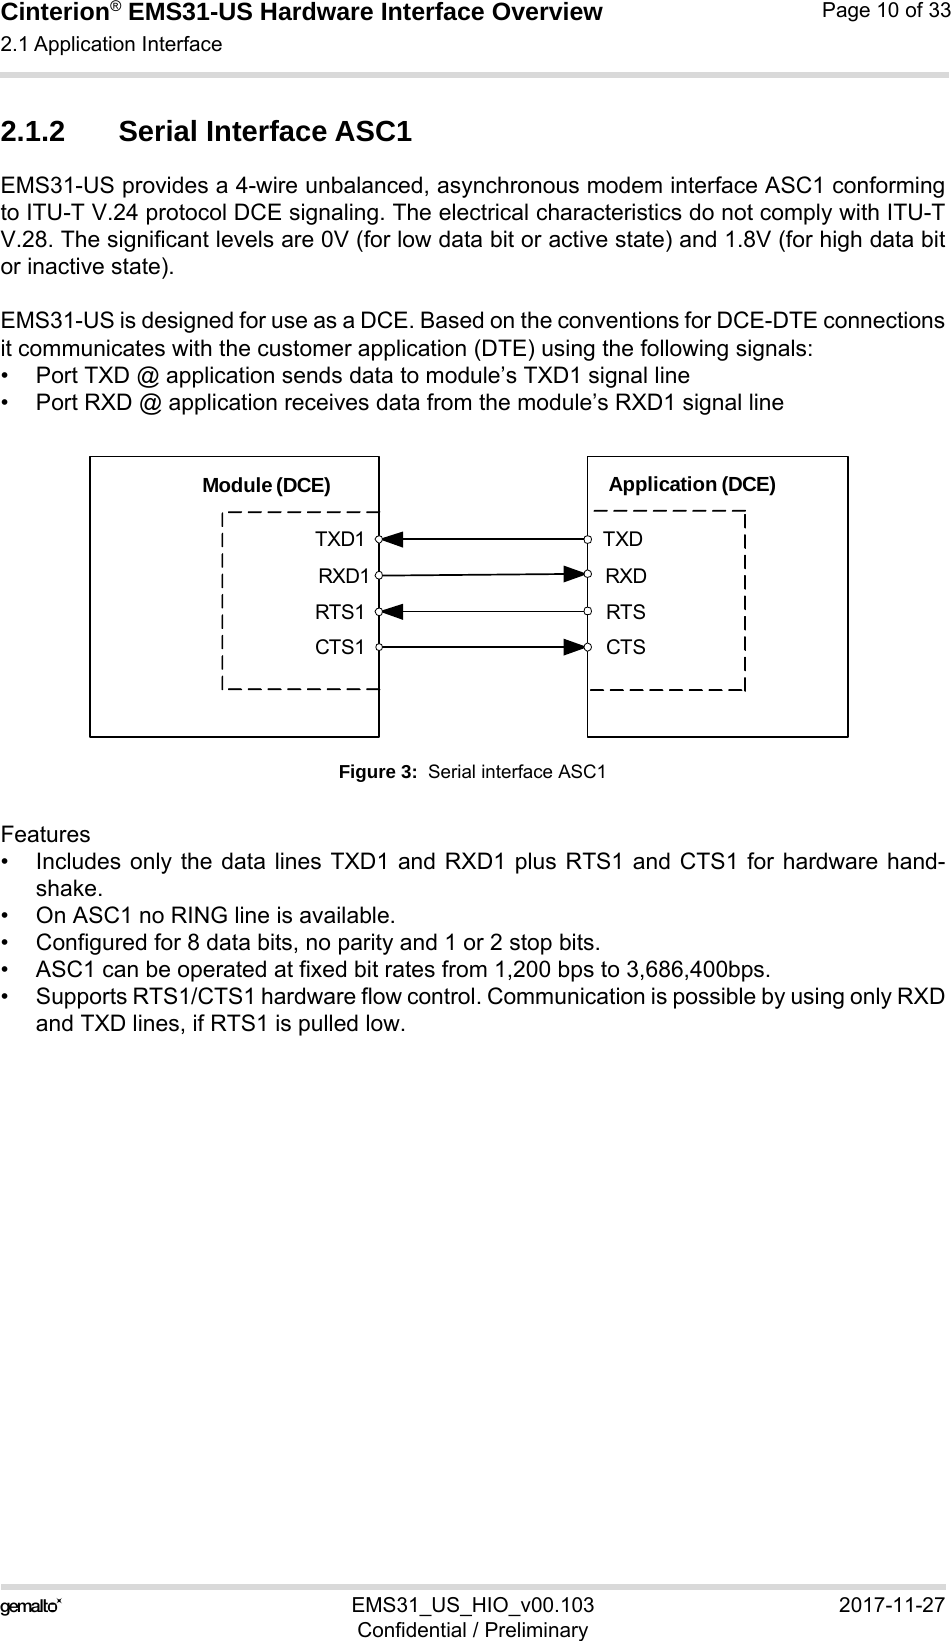 Cinterion® EMS31-US Hardware Interface Overview2.1 Application Interface17EMS31_US_HIO_v00.103 2017-11-27Confidential / PreliminaryPage 10 of 332.1.2 Serial Interface ASC1EMS31-US provides a 4-wire unbalanced, asynchronous modem interface ASC1 conformingto ITU-T V.24 protocol DCE signaling. The electrical characteristics do not comply with ITU-TV.28. The significant levels are 0V (for low data bit or active state) and 1.8V (for high data bitor inactive state).EMS31-US is designed for use as a DCE. Based on the conventions for DCE-DTE connectionsit communicates with the customer application (DTE) using the following signals:• Port TXD @ application sends data to module’s TXD1 signal line• Port RXD @ application receives data from the module’s RXD1 signal lineFigure 3:  Serial interface ASC1Features• Includes only the data lines TXD1 and RXD1 plus RTS1 and CTS1 for hardware hand-shake. • On ASC1 no RING line is available.• Configured for 8 data bits, no parity and 1 or 2 stop bits.• ASC1 can be operated at fixed bit rates from 1,200 bps to 3,686,400bps.• Supports RTS1/CTS1 hardware flow control. Communication is possible by using only RXDand TXD lines, if RTS1 is pulled low.TXD1RXD1RTS1CTS1TXDRXDRTSCTSModule (DCE) Application (DCE)